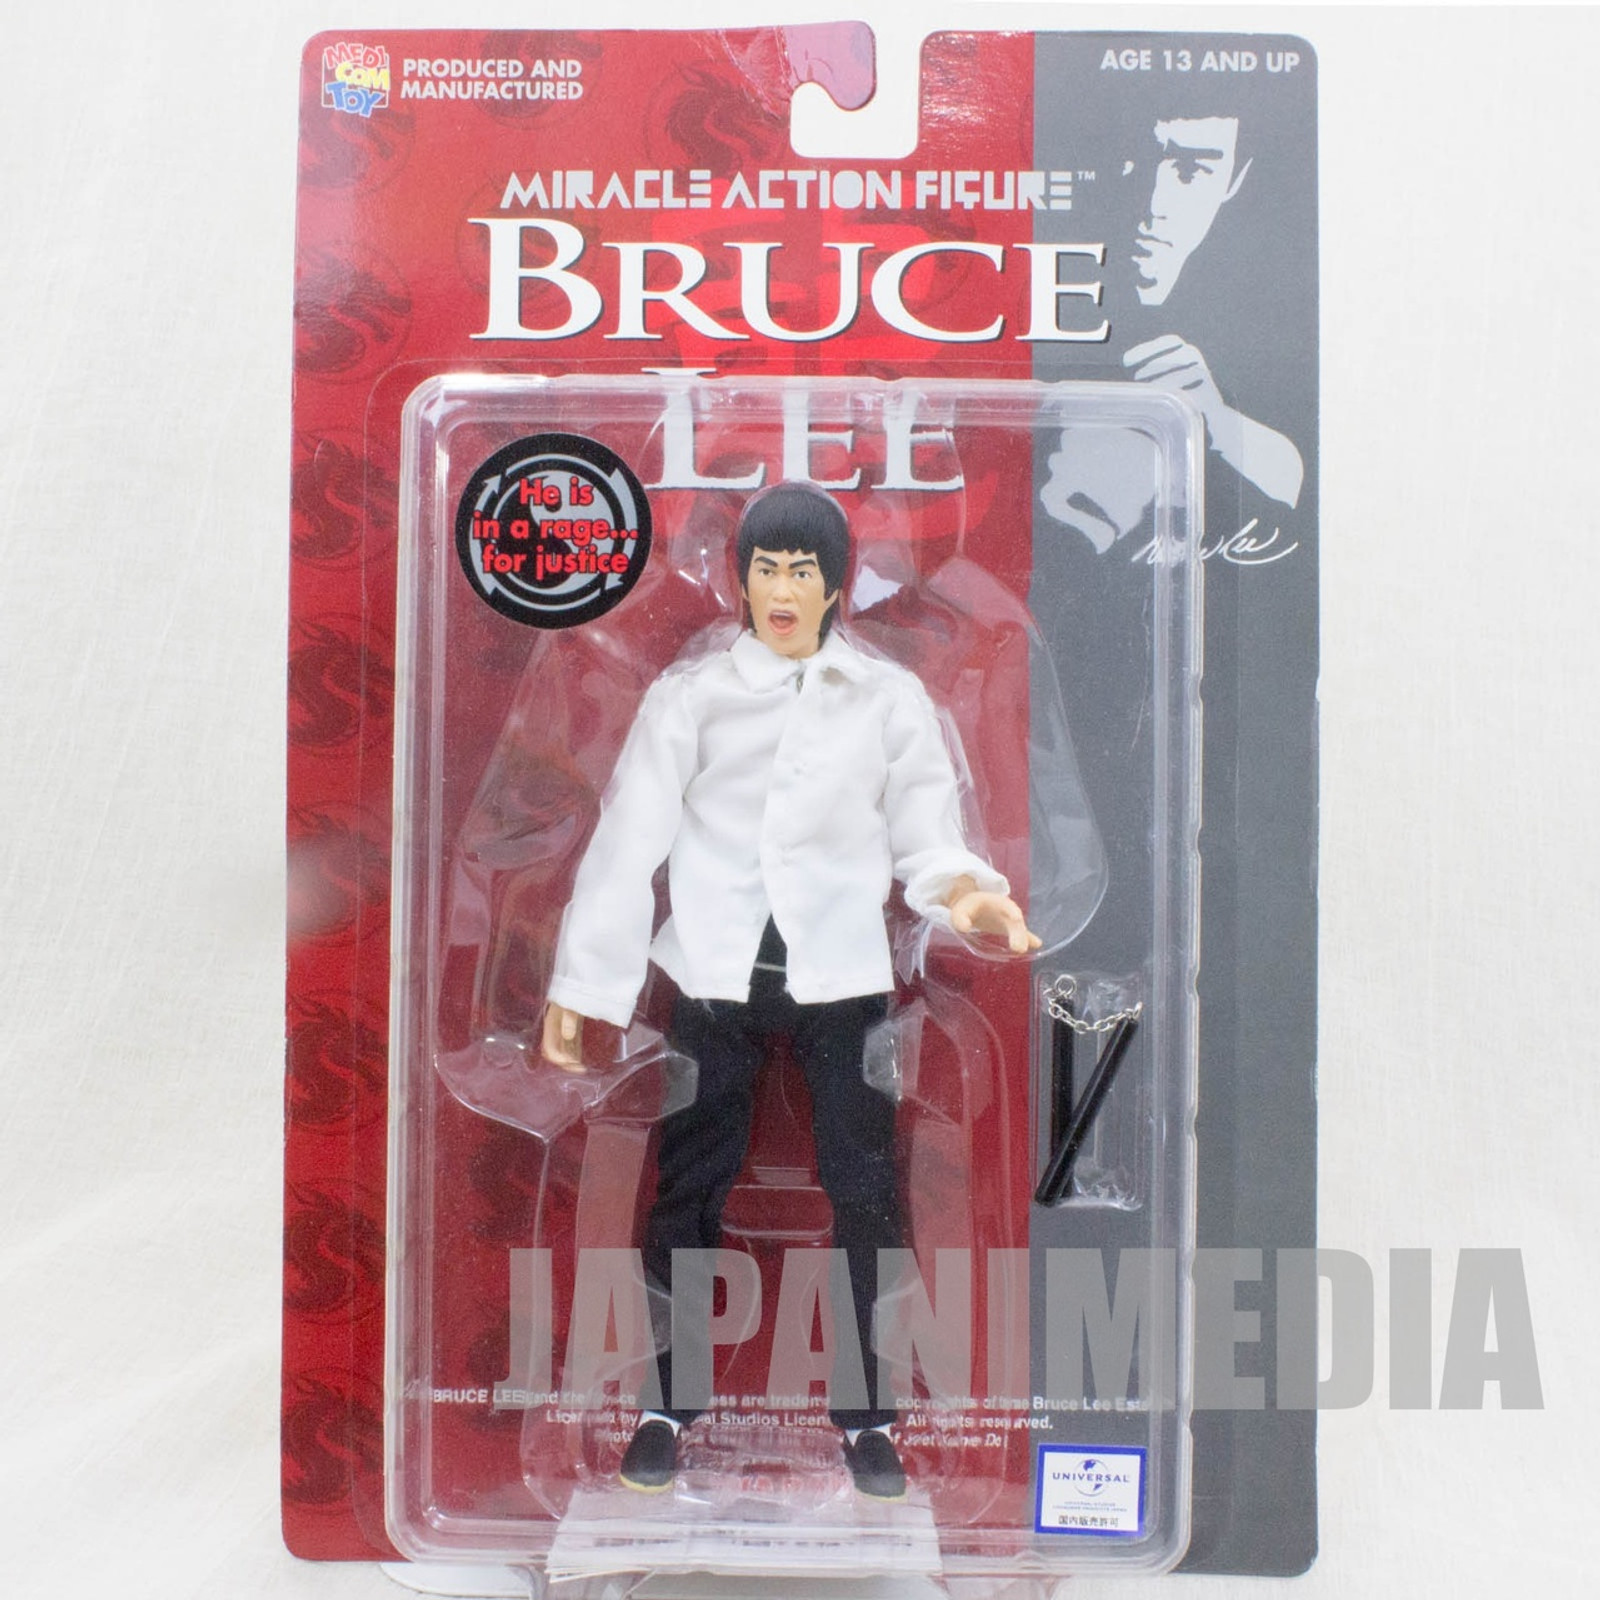 BRUCE LEE Miracle Action Figure White Clothes Medicom Toy JAPAN KUNG FU MOVIE